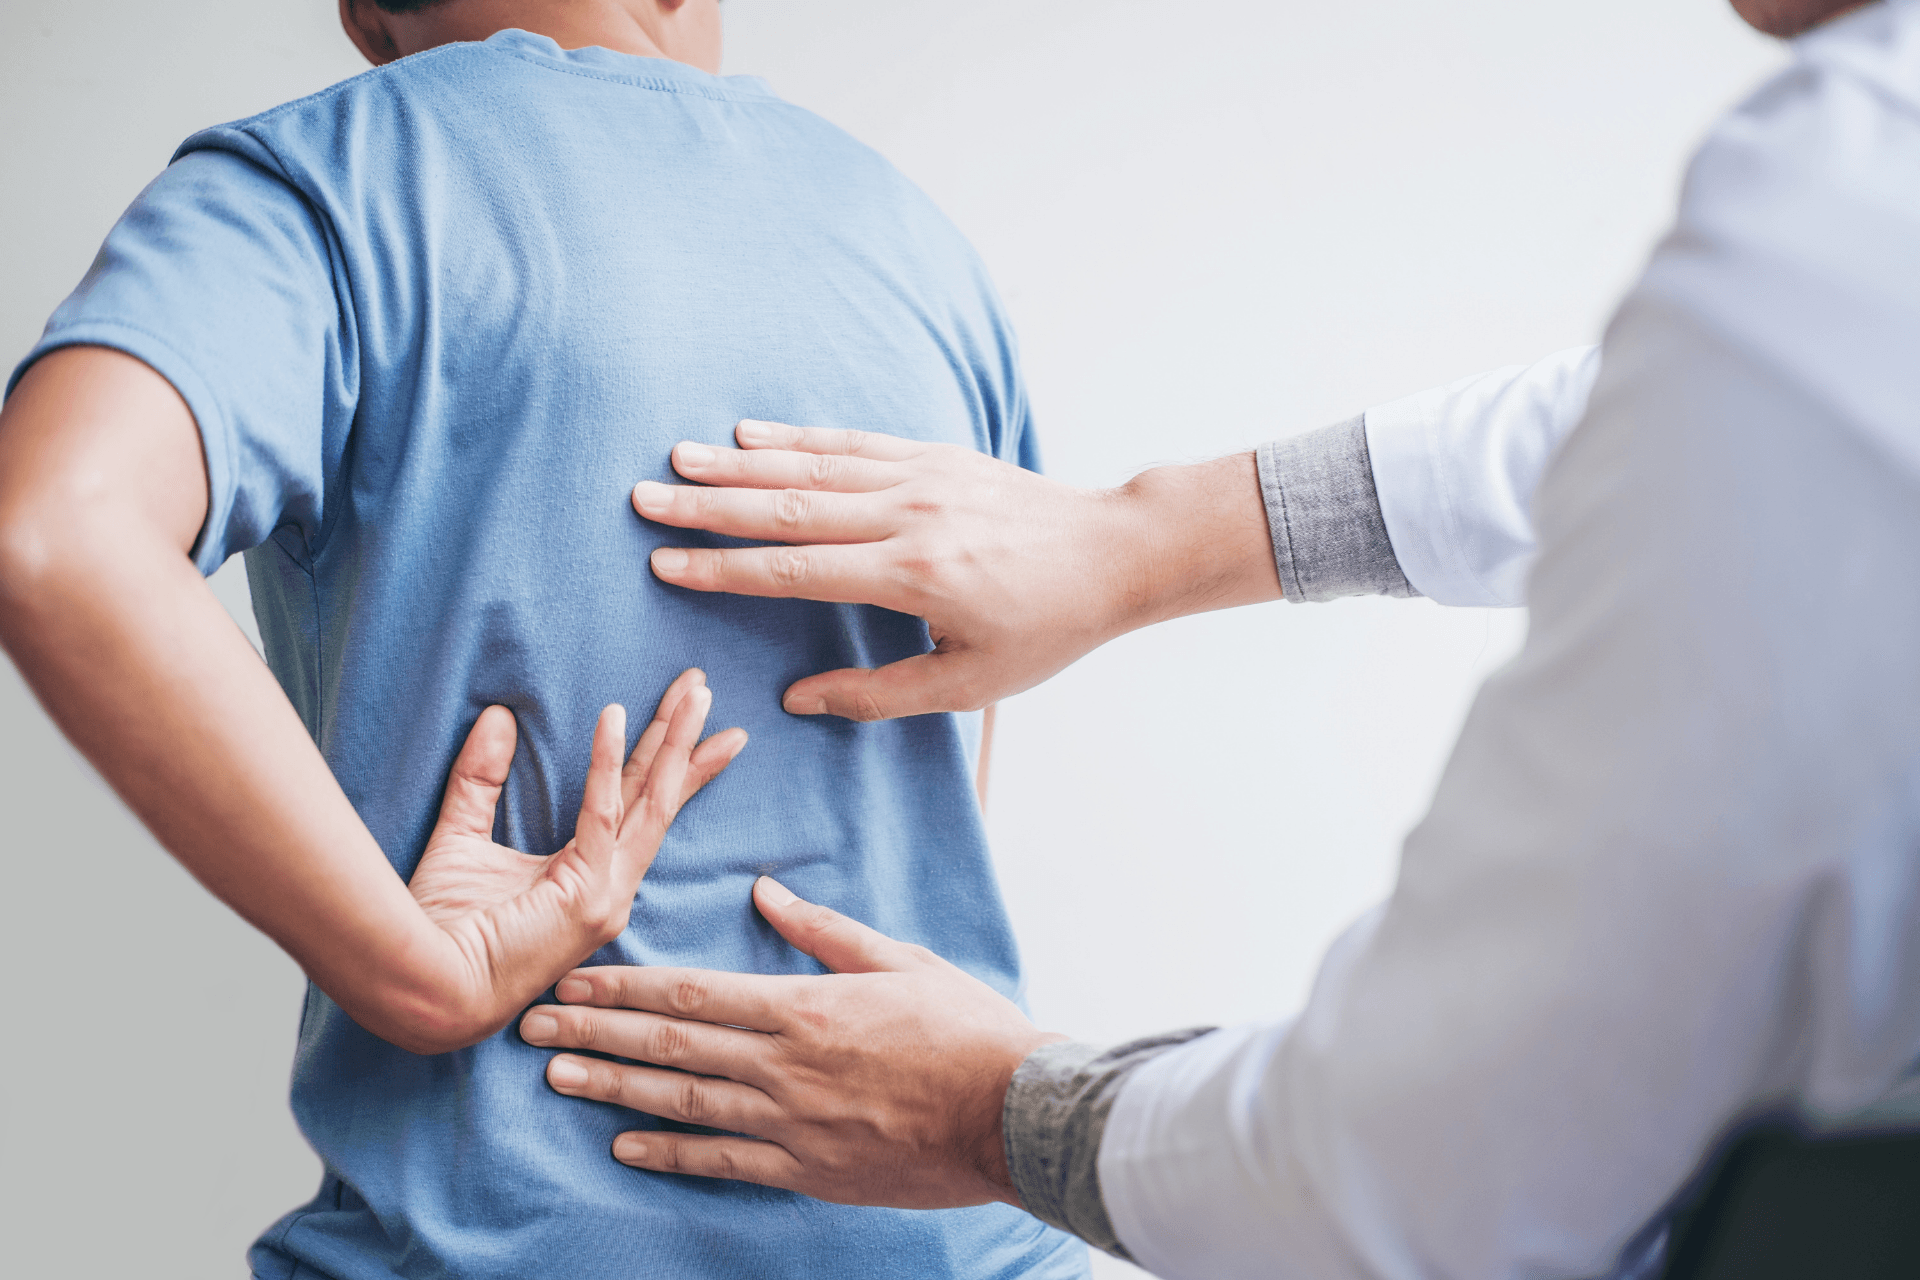 Treating Back Pain at Advanced Physicians